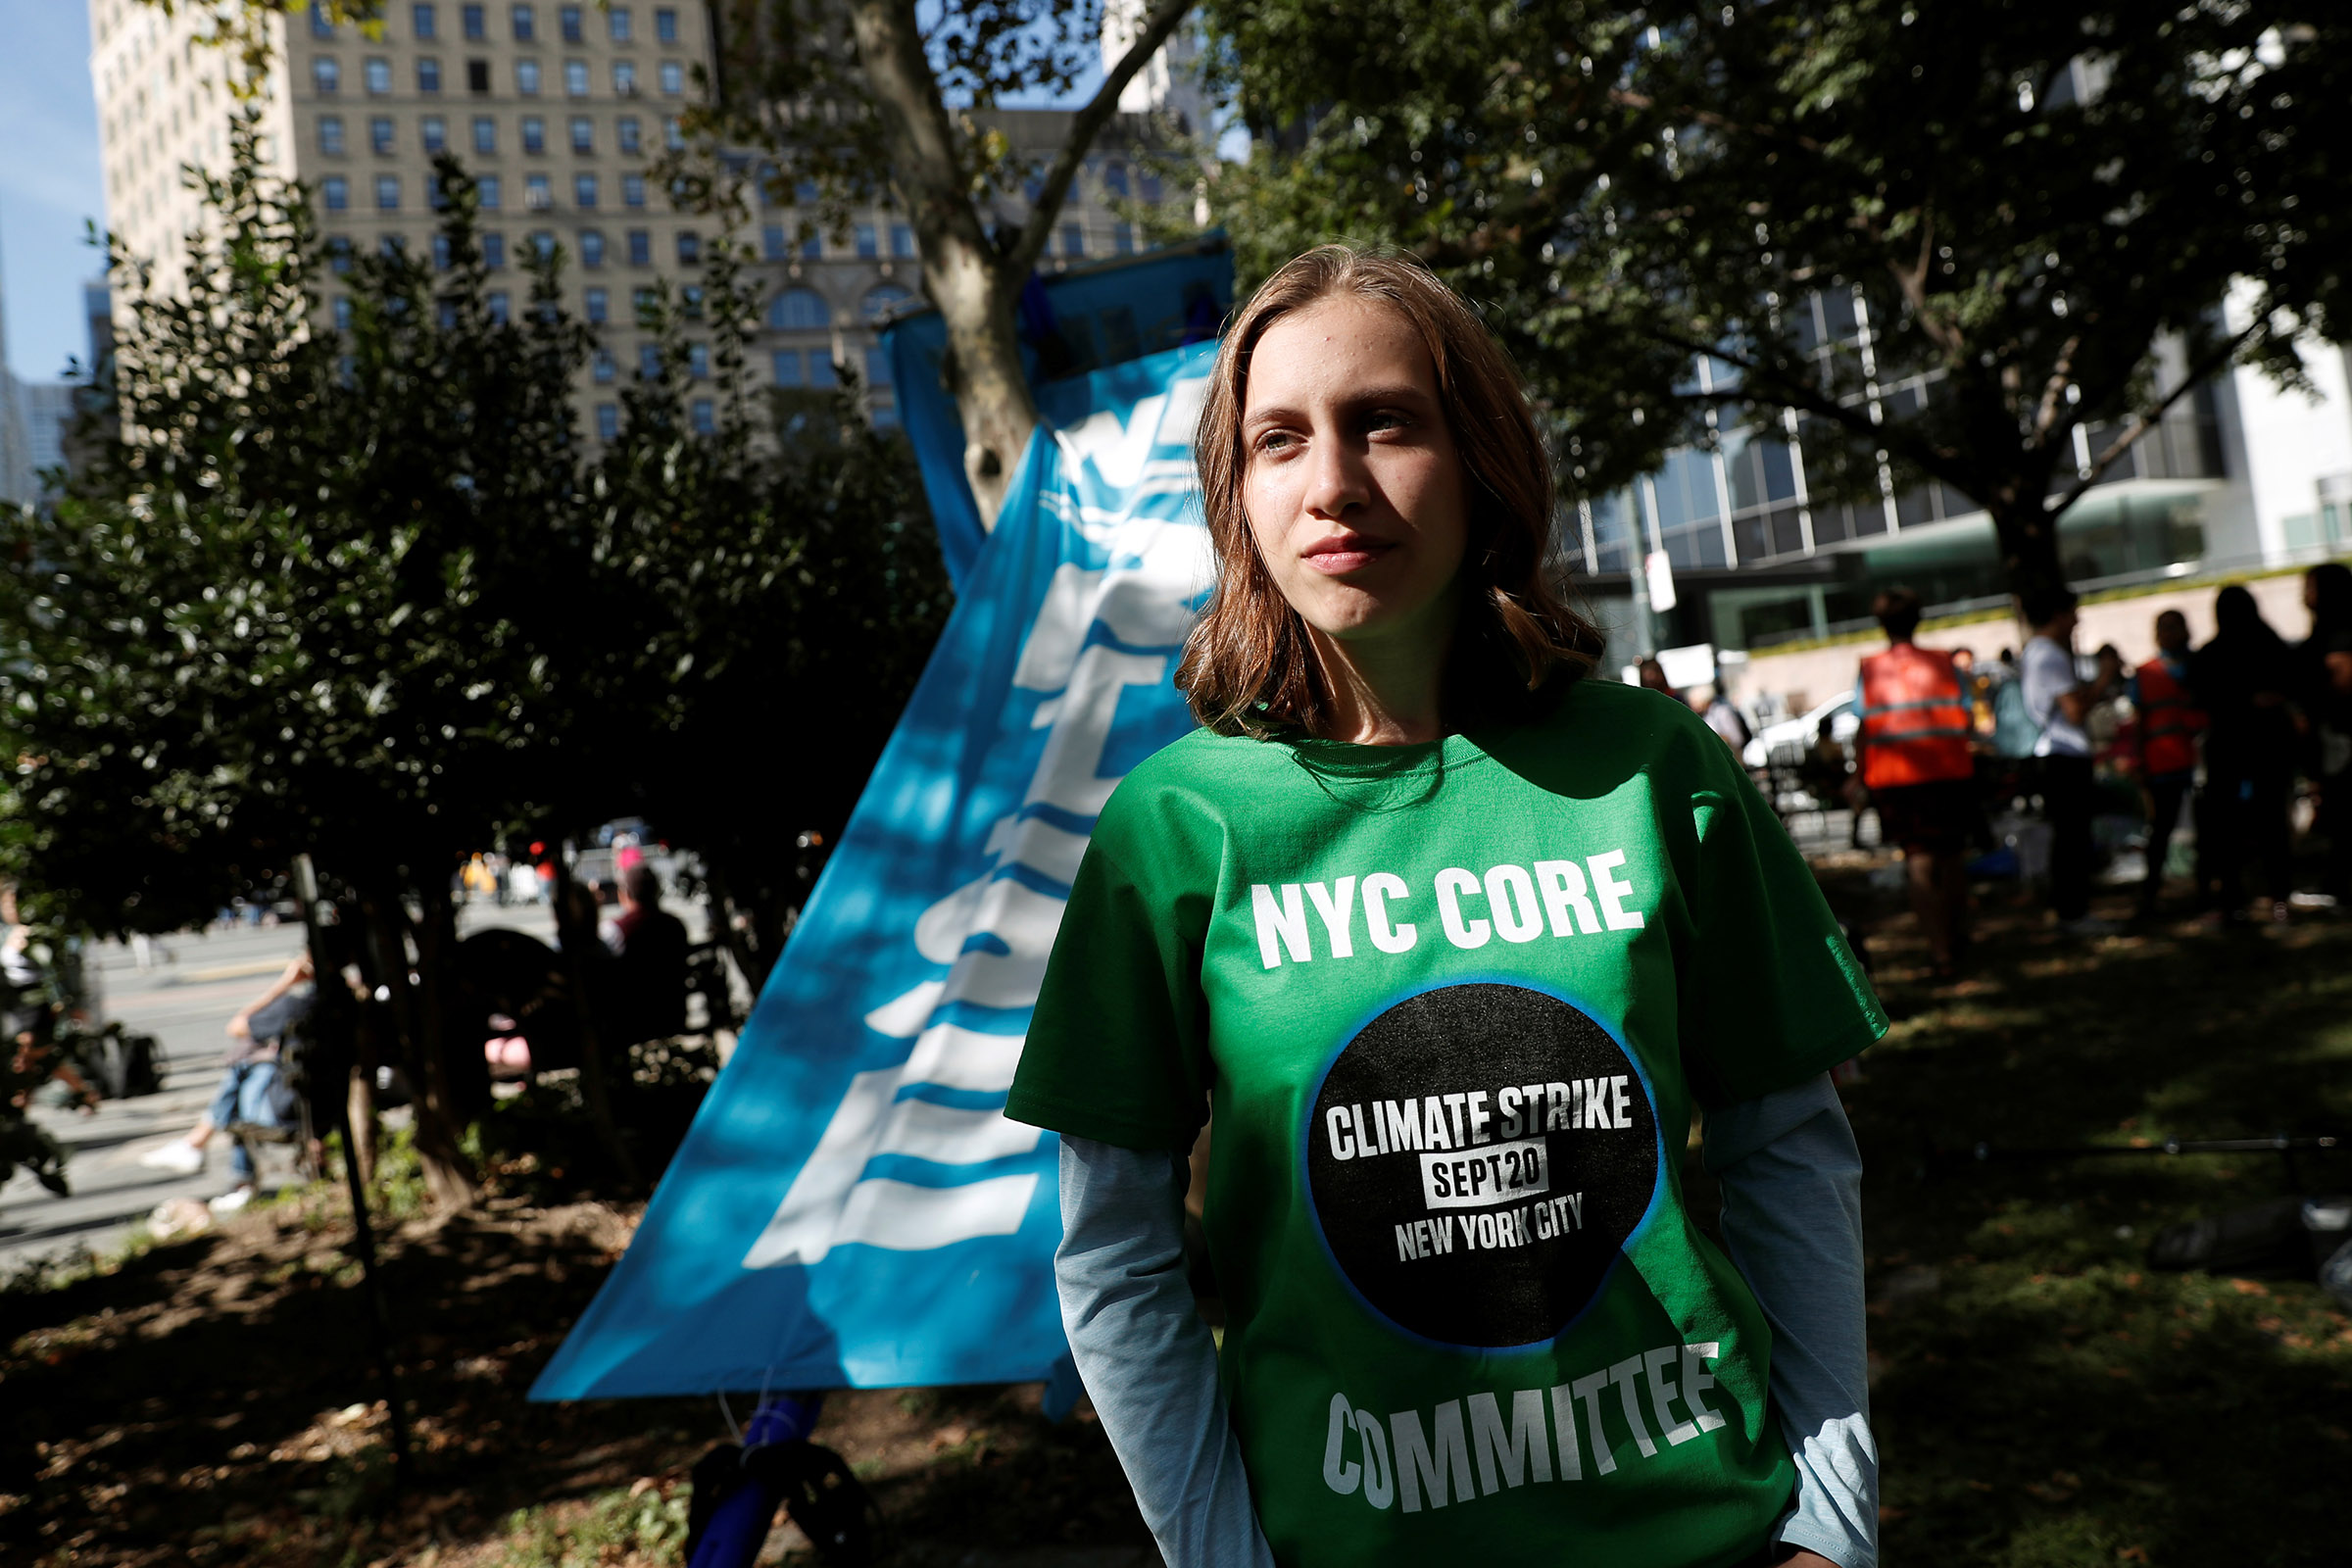 14-year-old activist Alexandria Villasenor takes part in a demonstration as part of the Global Climate Strike in Manhattan in New York, U.S., Sept. 20, 2019. (Shannon Stapleton—Reuters)